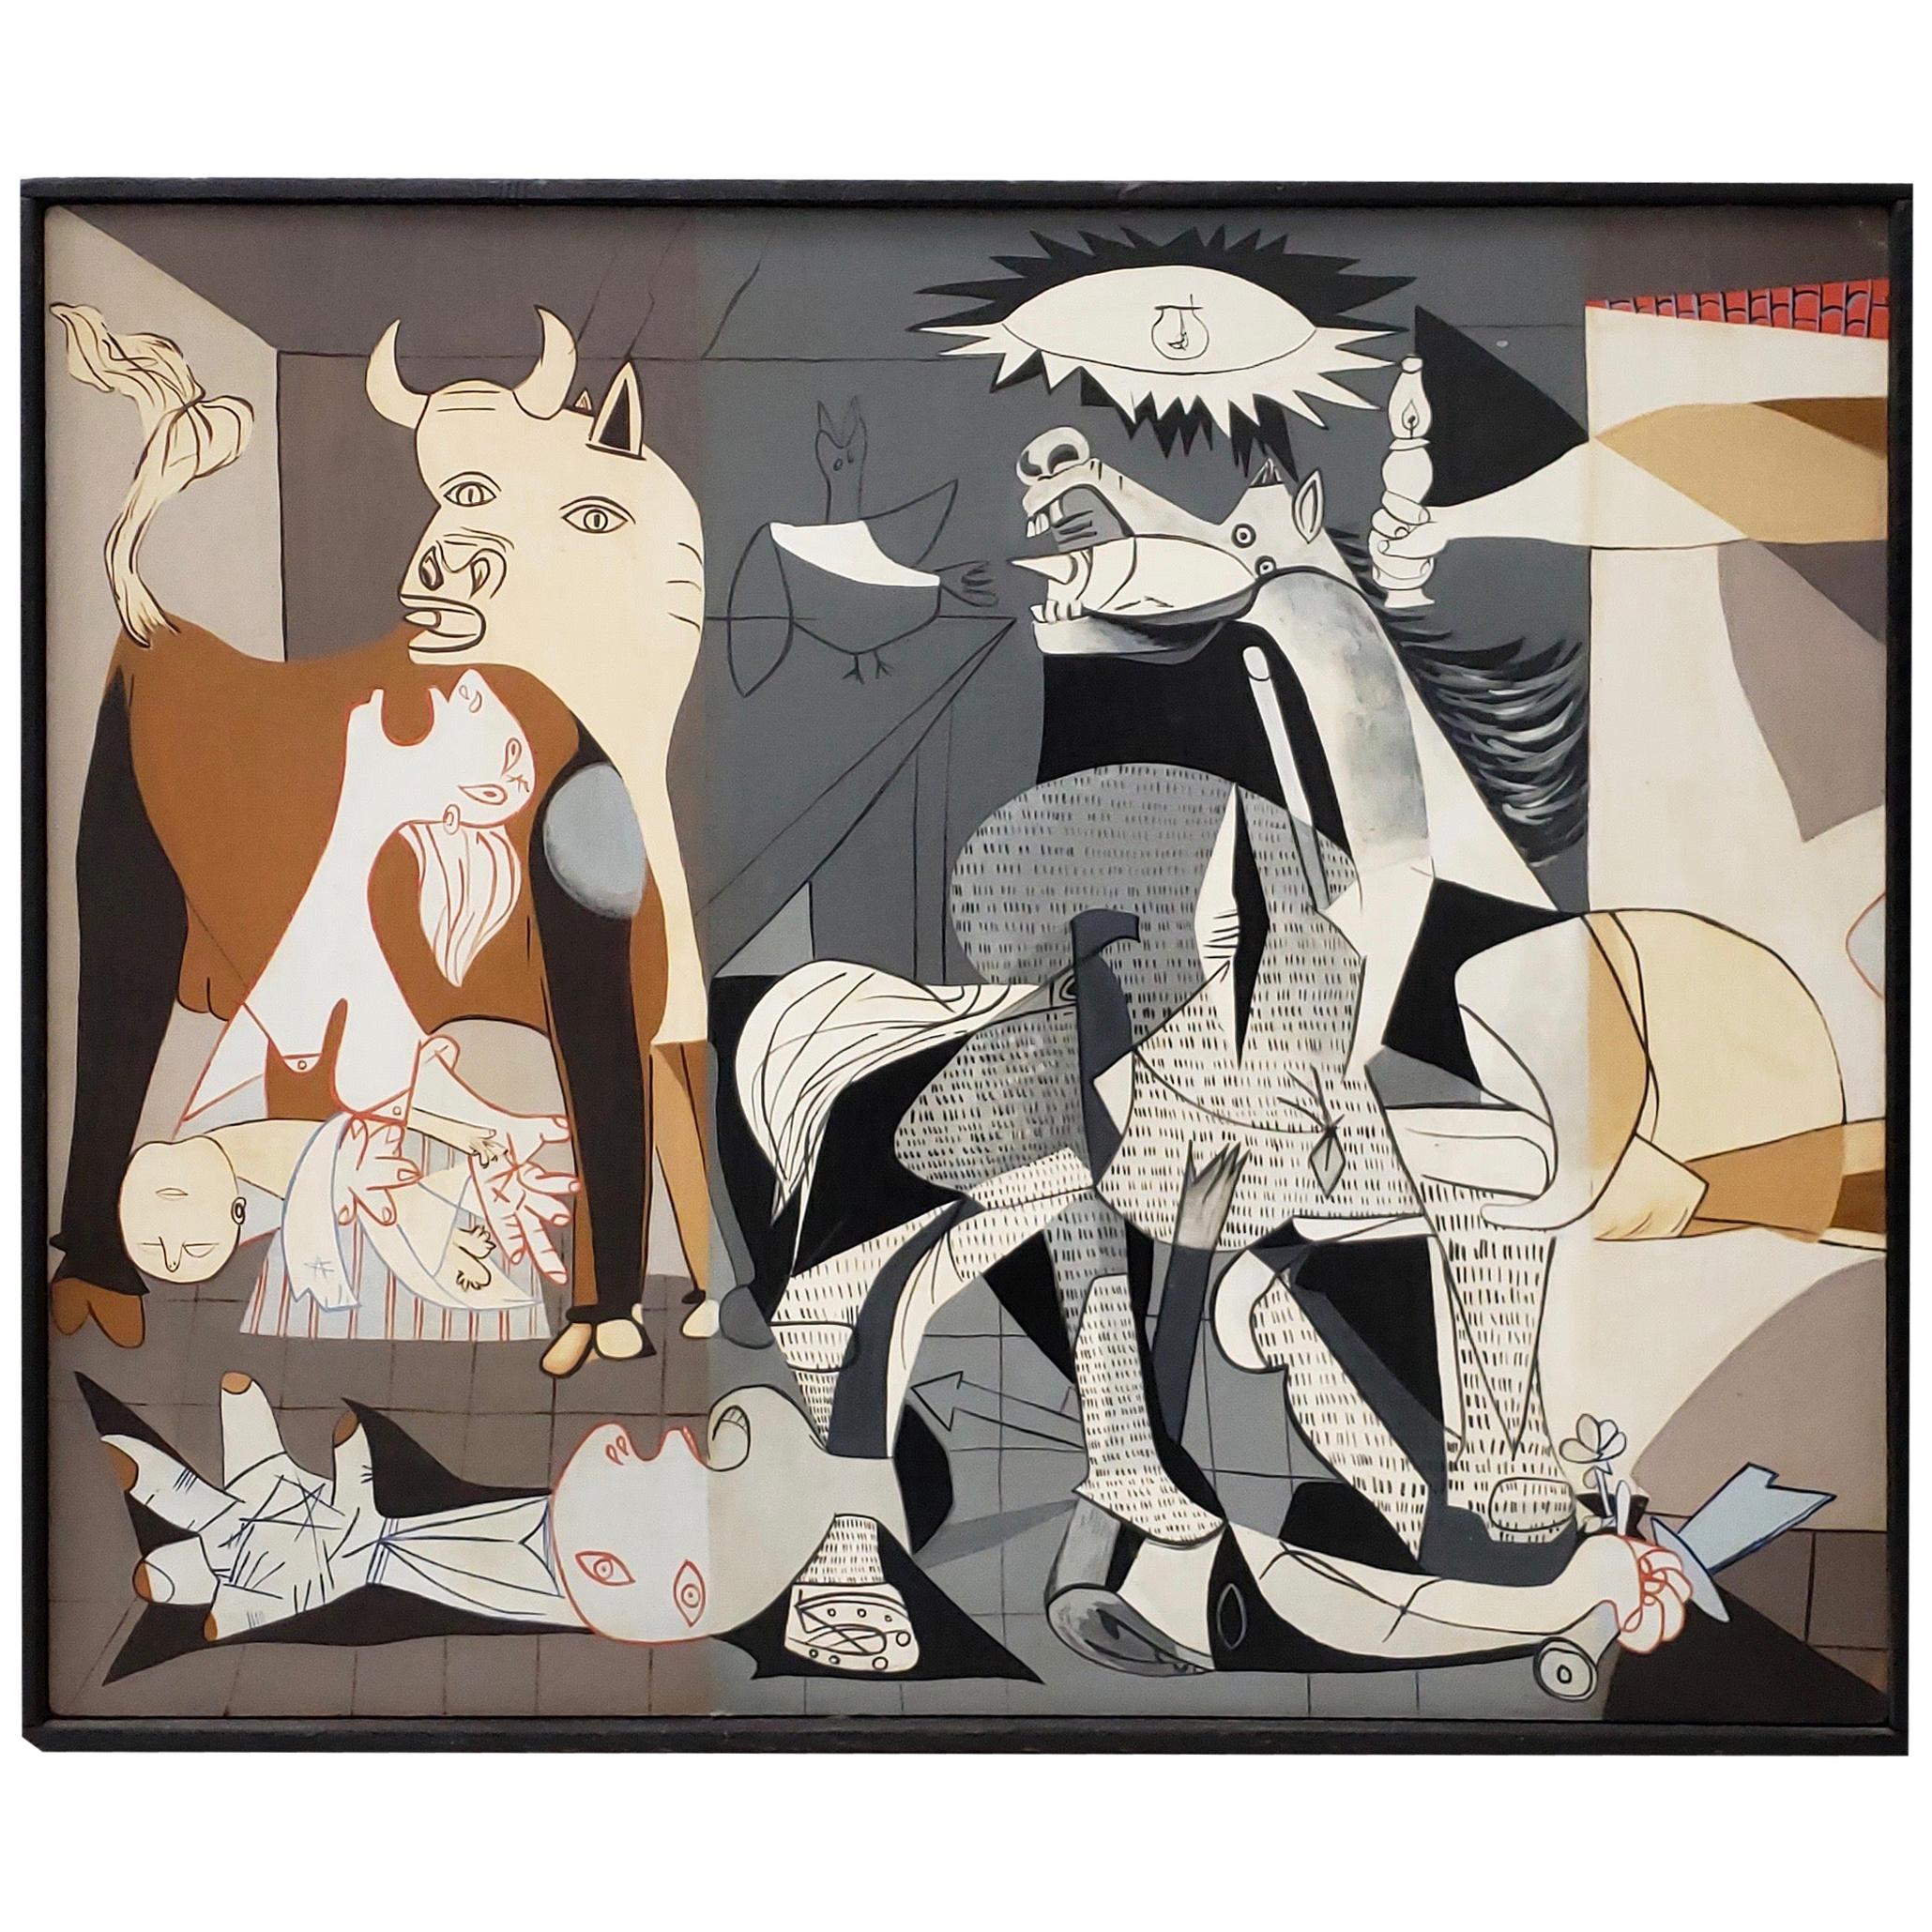 Vintage Oil Painting "Remnants of Guernica" by Donna, circa 1970s